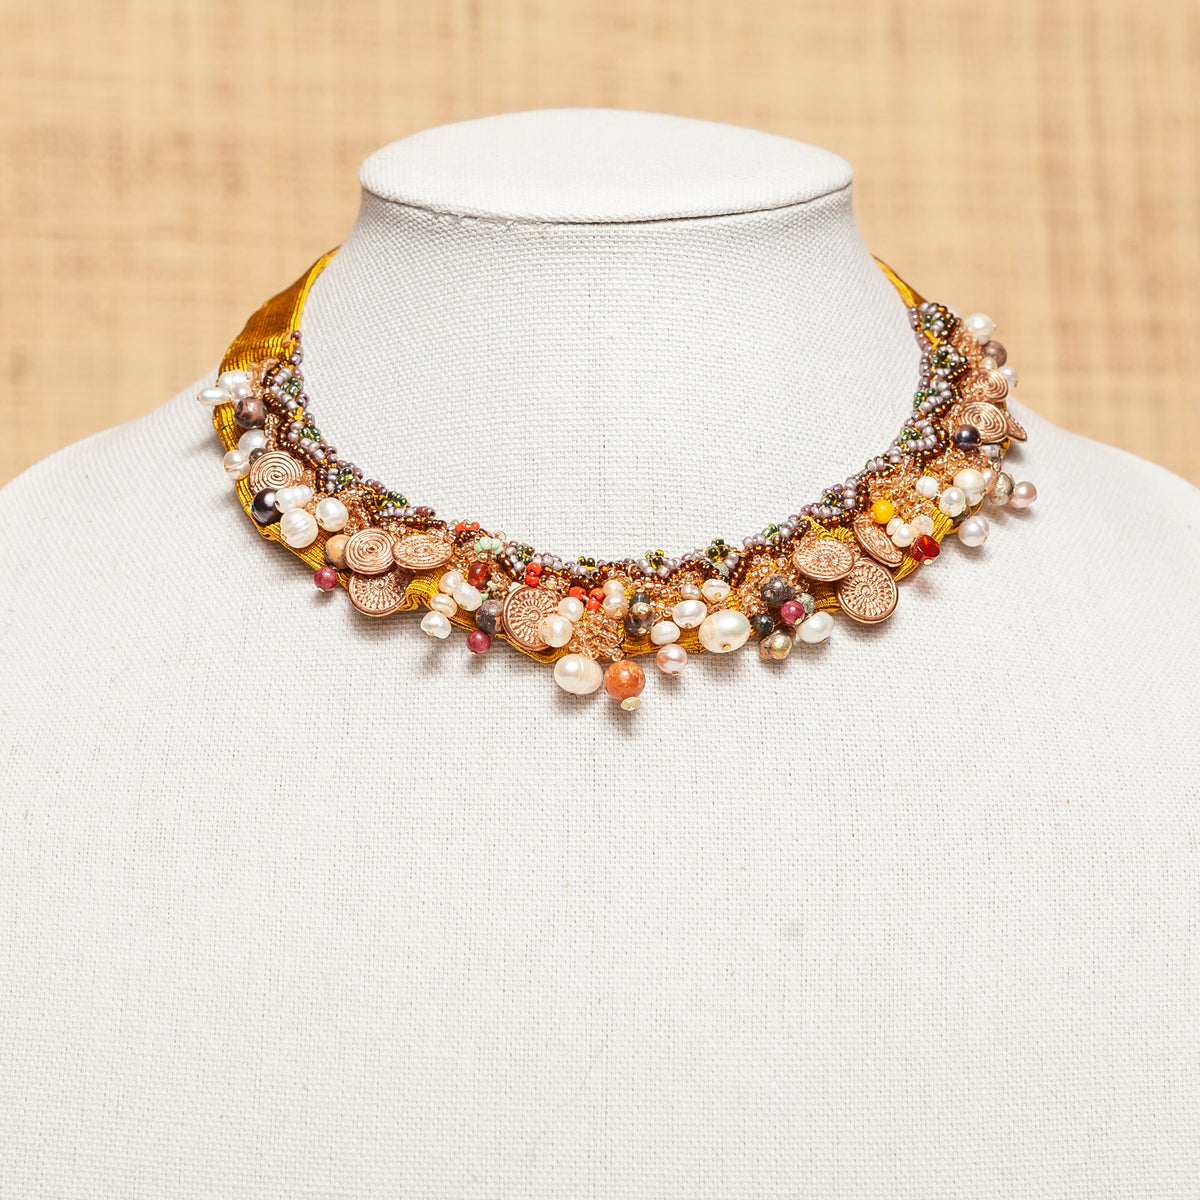 Narrow in Golden Yellow Tribal Necklace